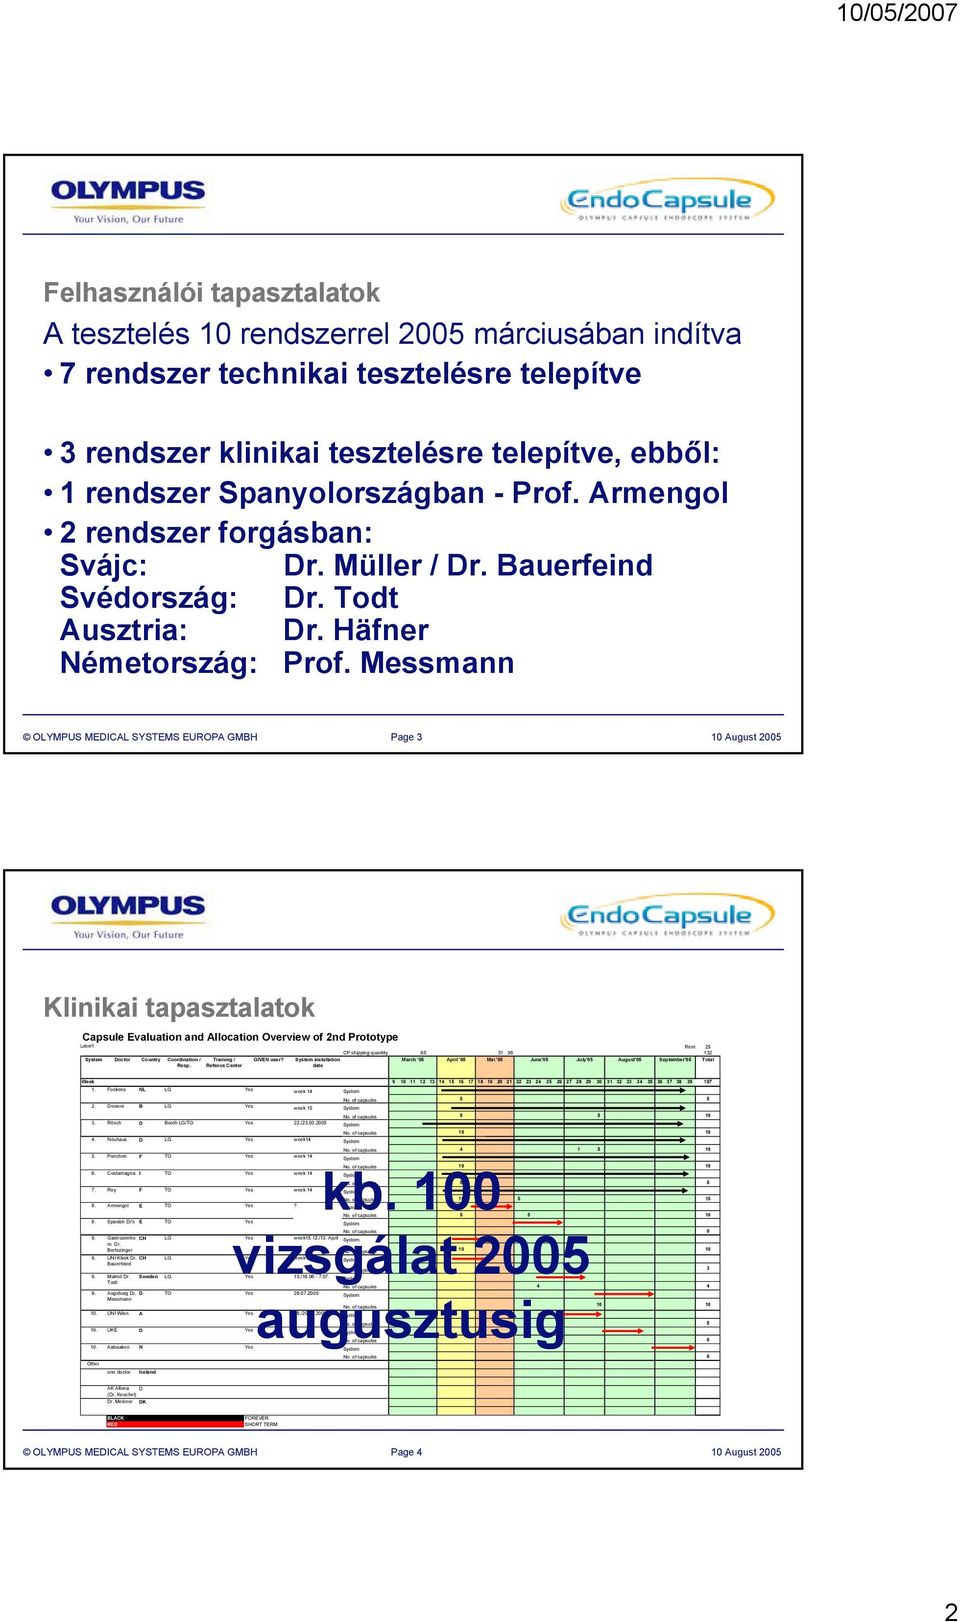 Messmann OLYMPUS MEDICAL SYSTEMS EUROPA GMBH Page 3 0 August 2005 Klinikai tapasztalatok Capsule Evaluation and Allocation Overview of 2nd Prototype Label Rem 25 32 CP shipping quantity 65 3 36 '05